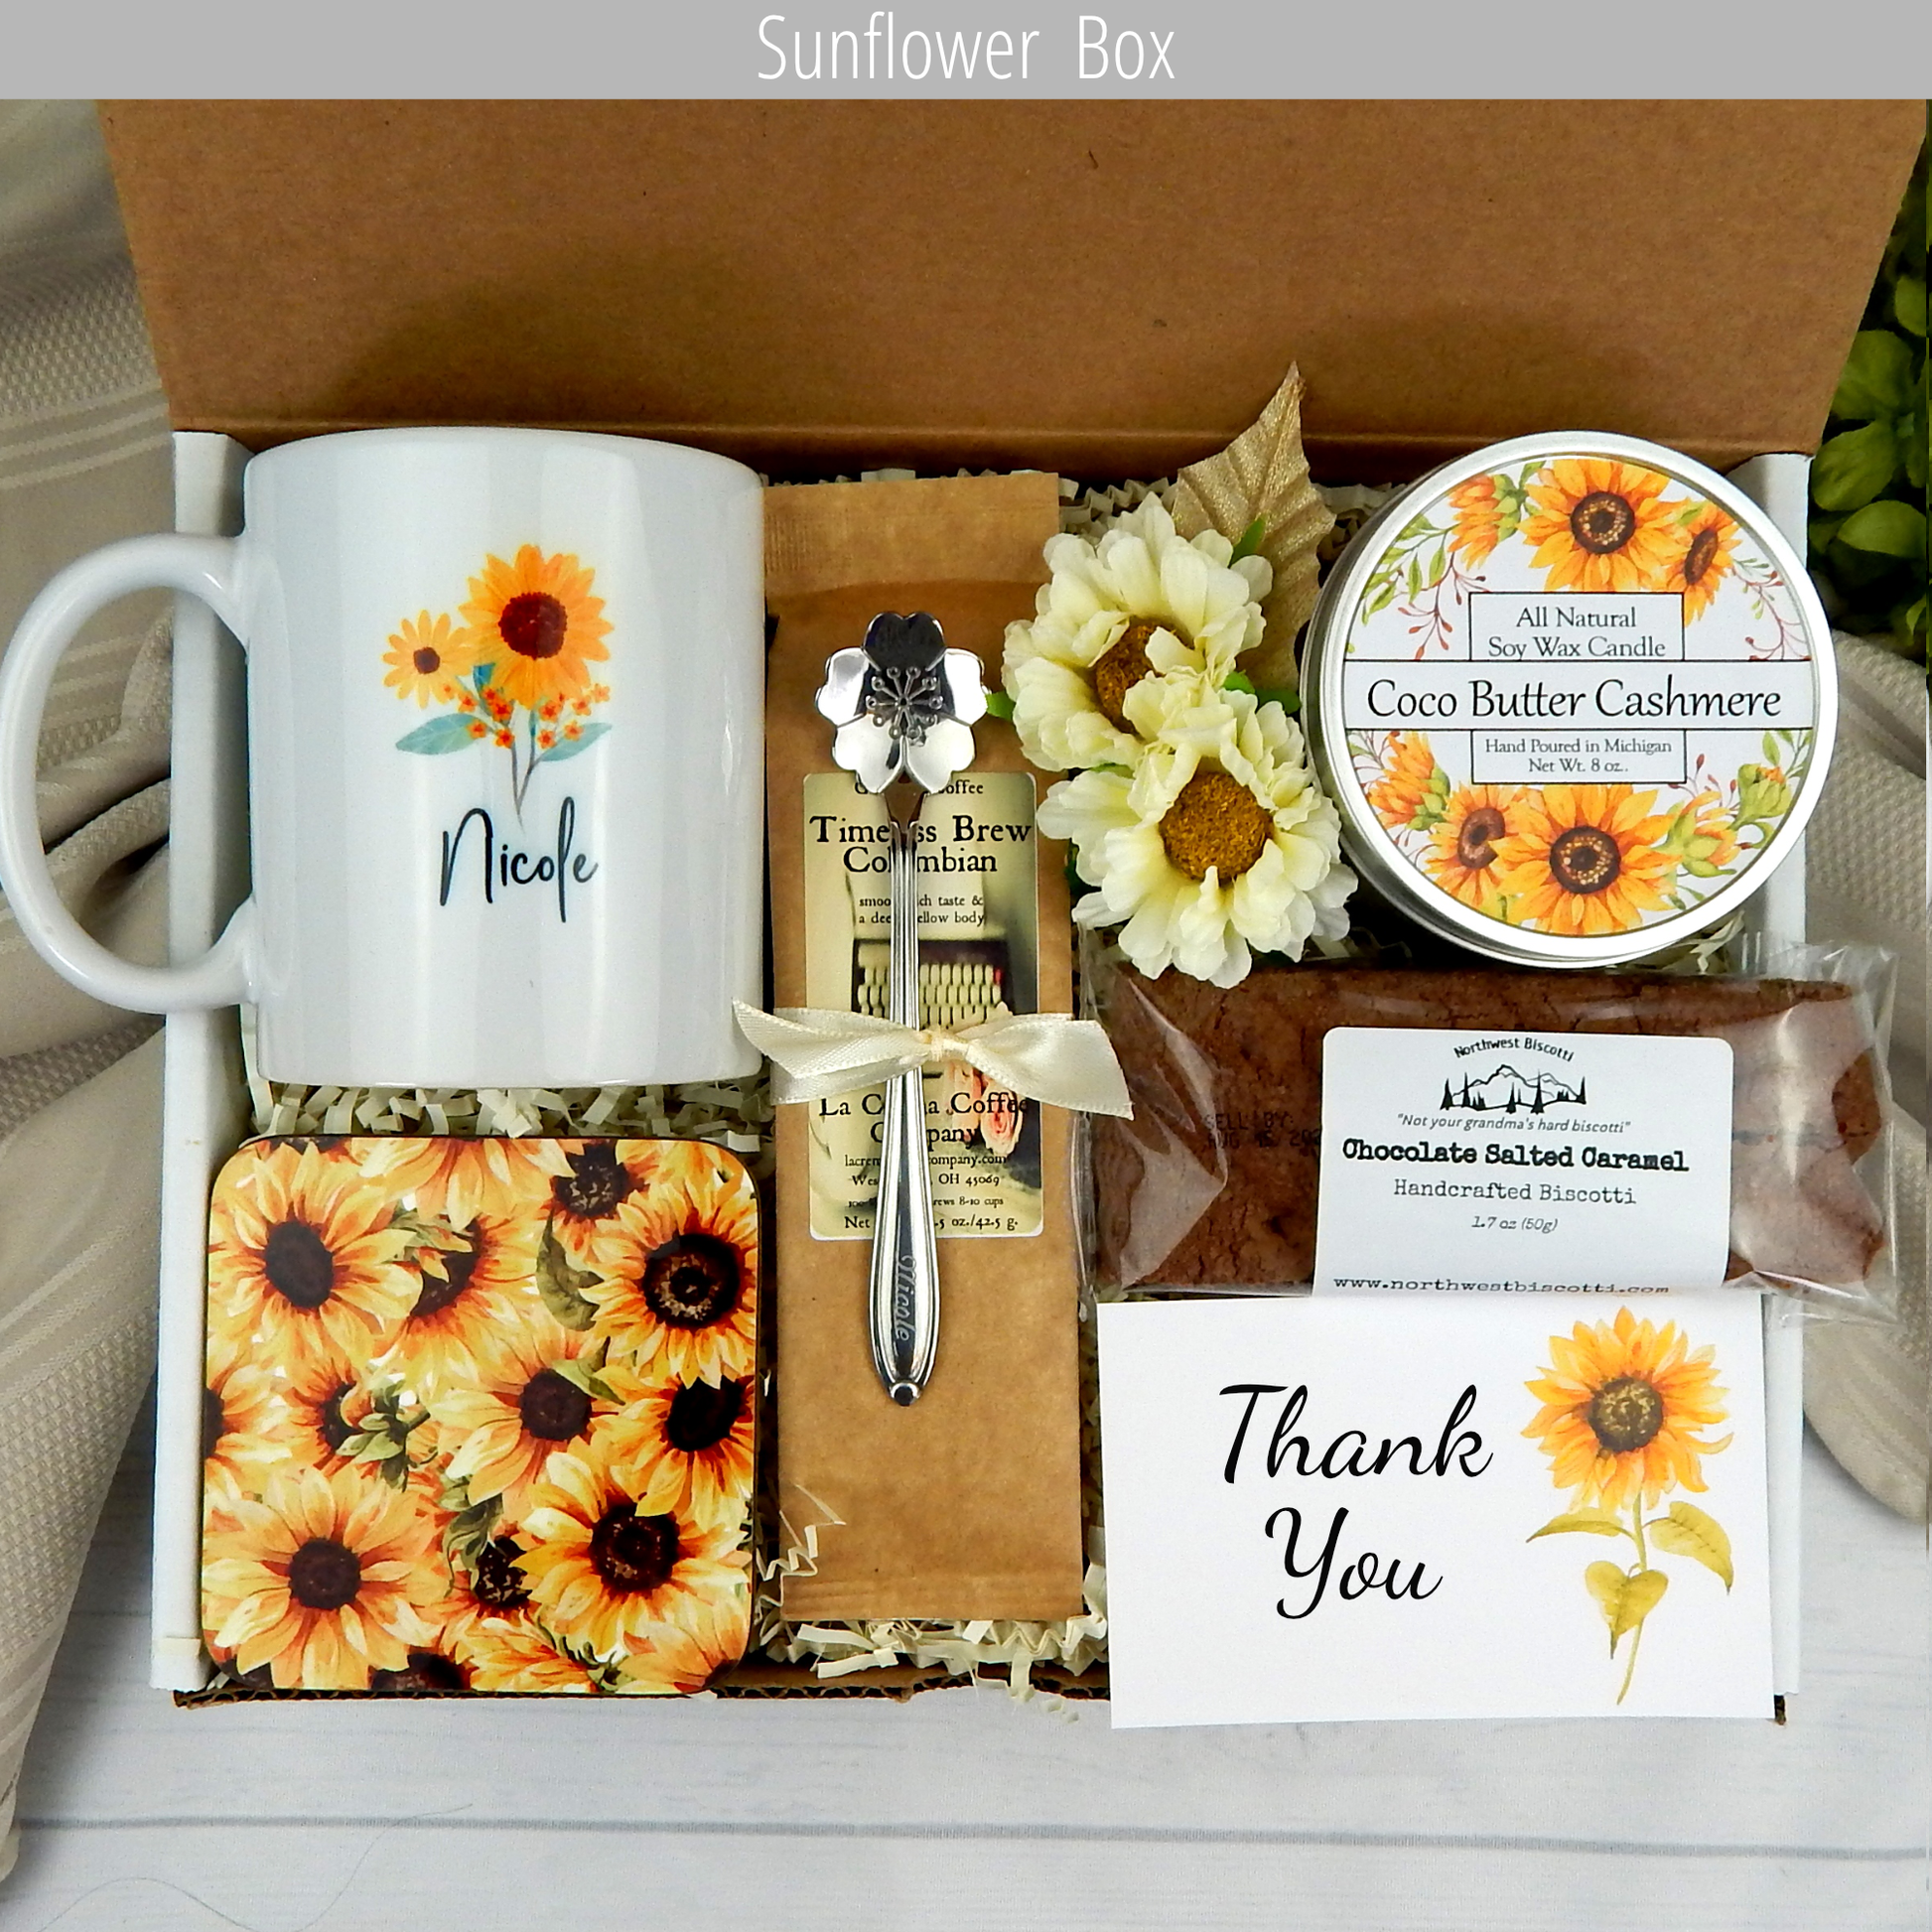 Show your appreciation: Gift basket for women with a personalized name mug, candle, comforting biscotti, and coffee with sunflower theme